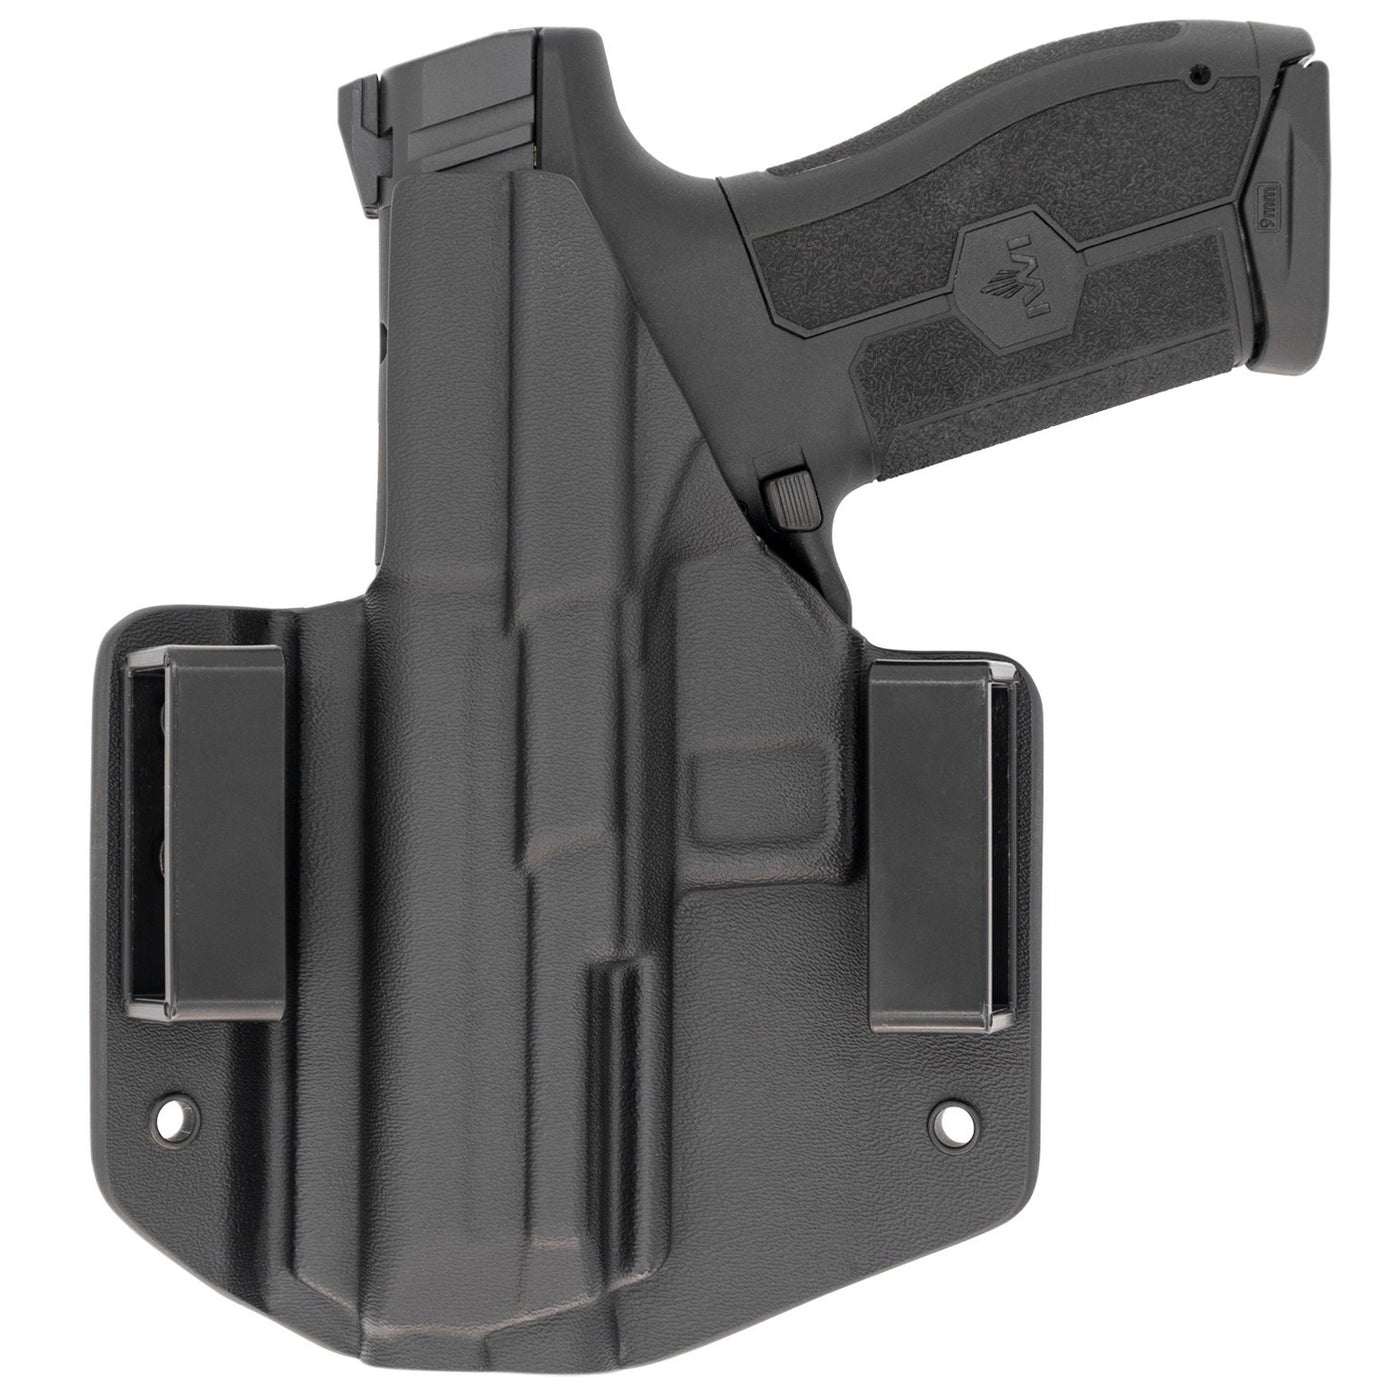 This is a C&G Holsters Covert Series Outside the waistband holster for an IWI Masada 9mm firearm showing the rear with the gun. 